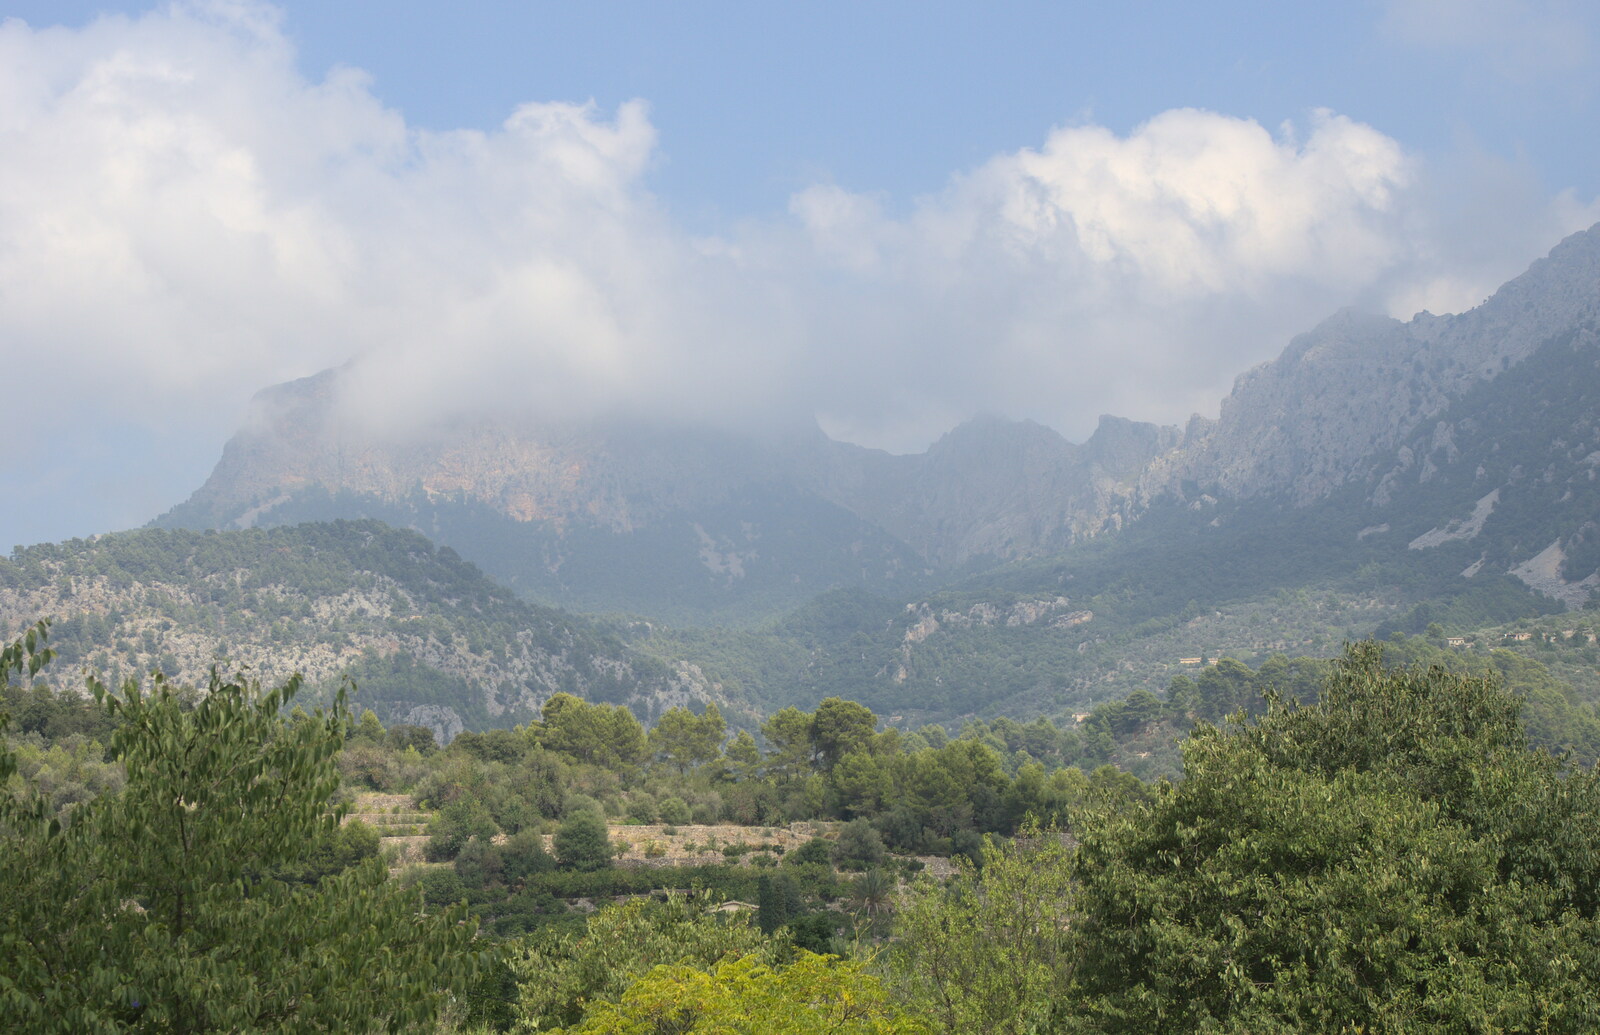 Another view of the mountains from A Trip to Sóller, Mallorca, Spain - 8th-14th September 2012